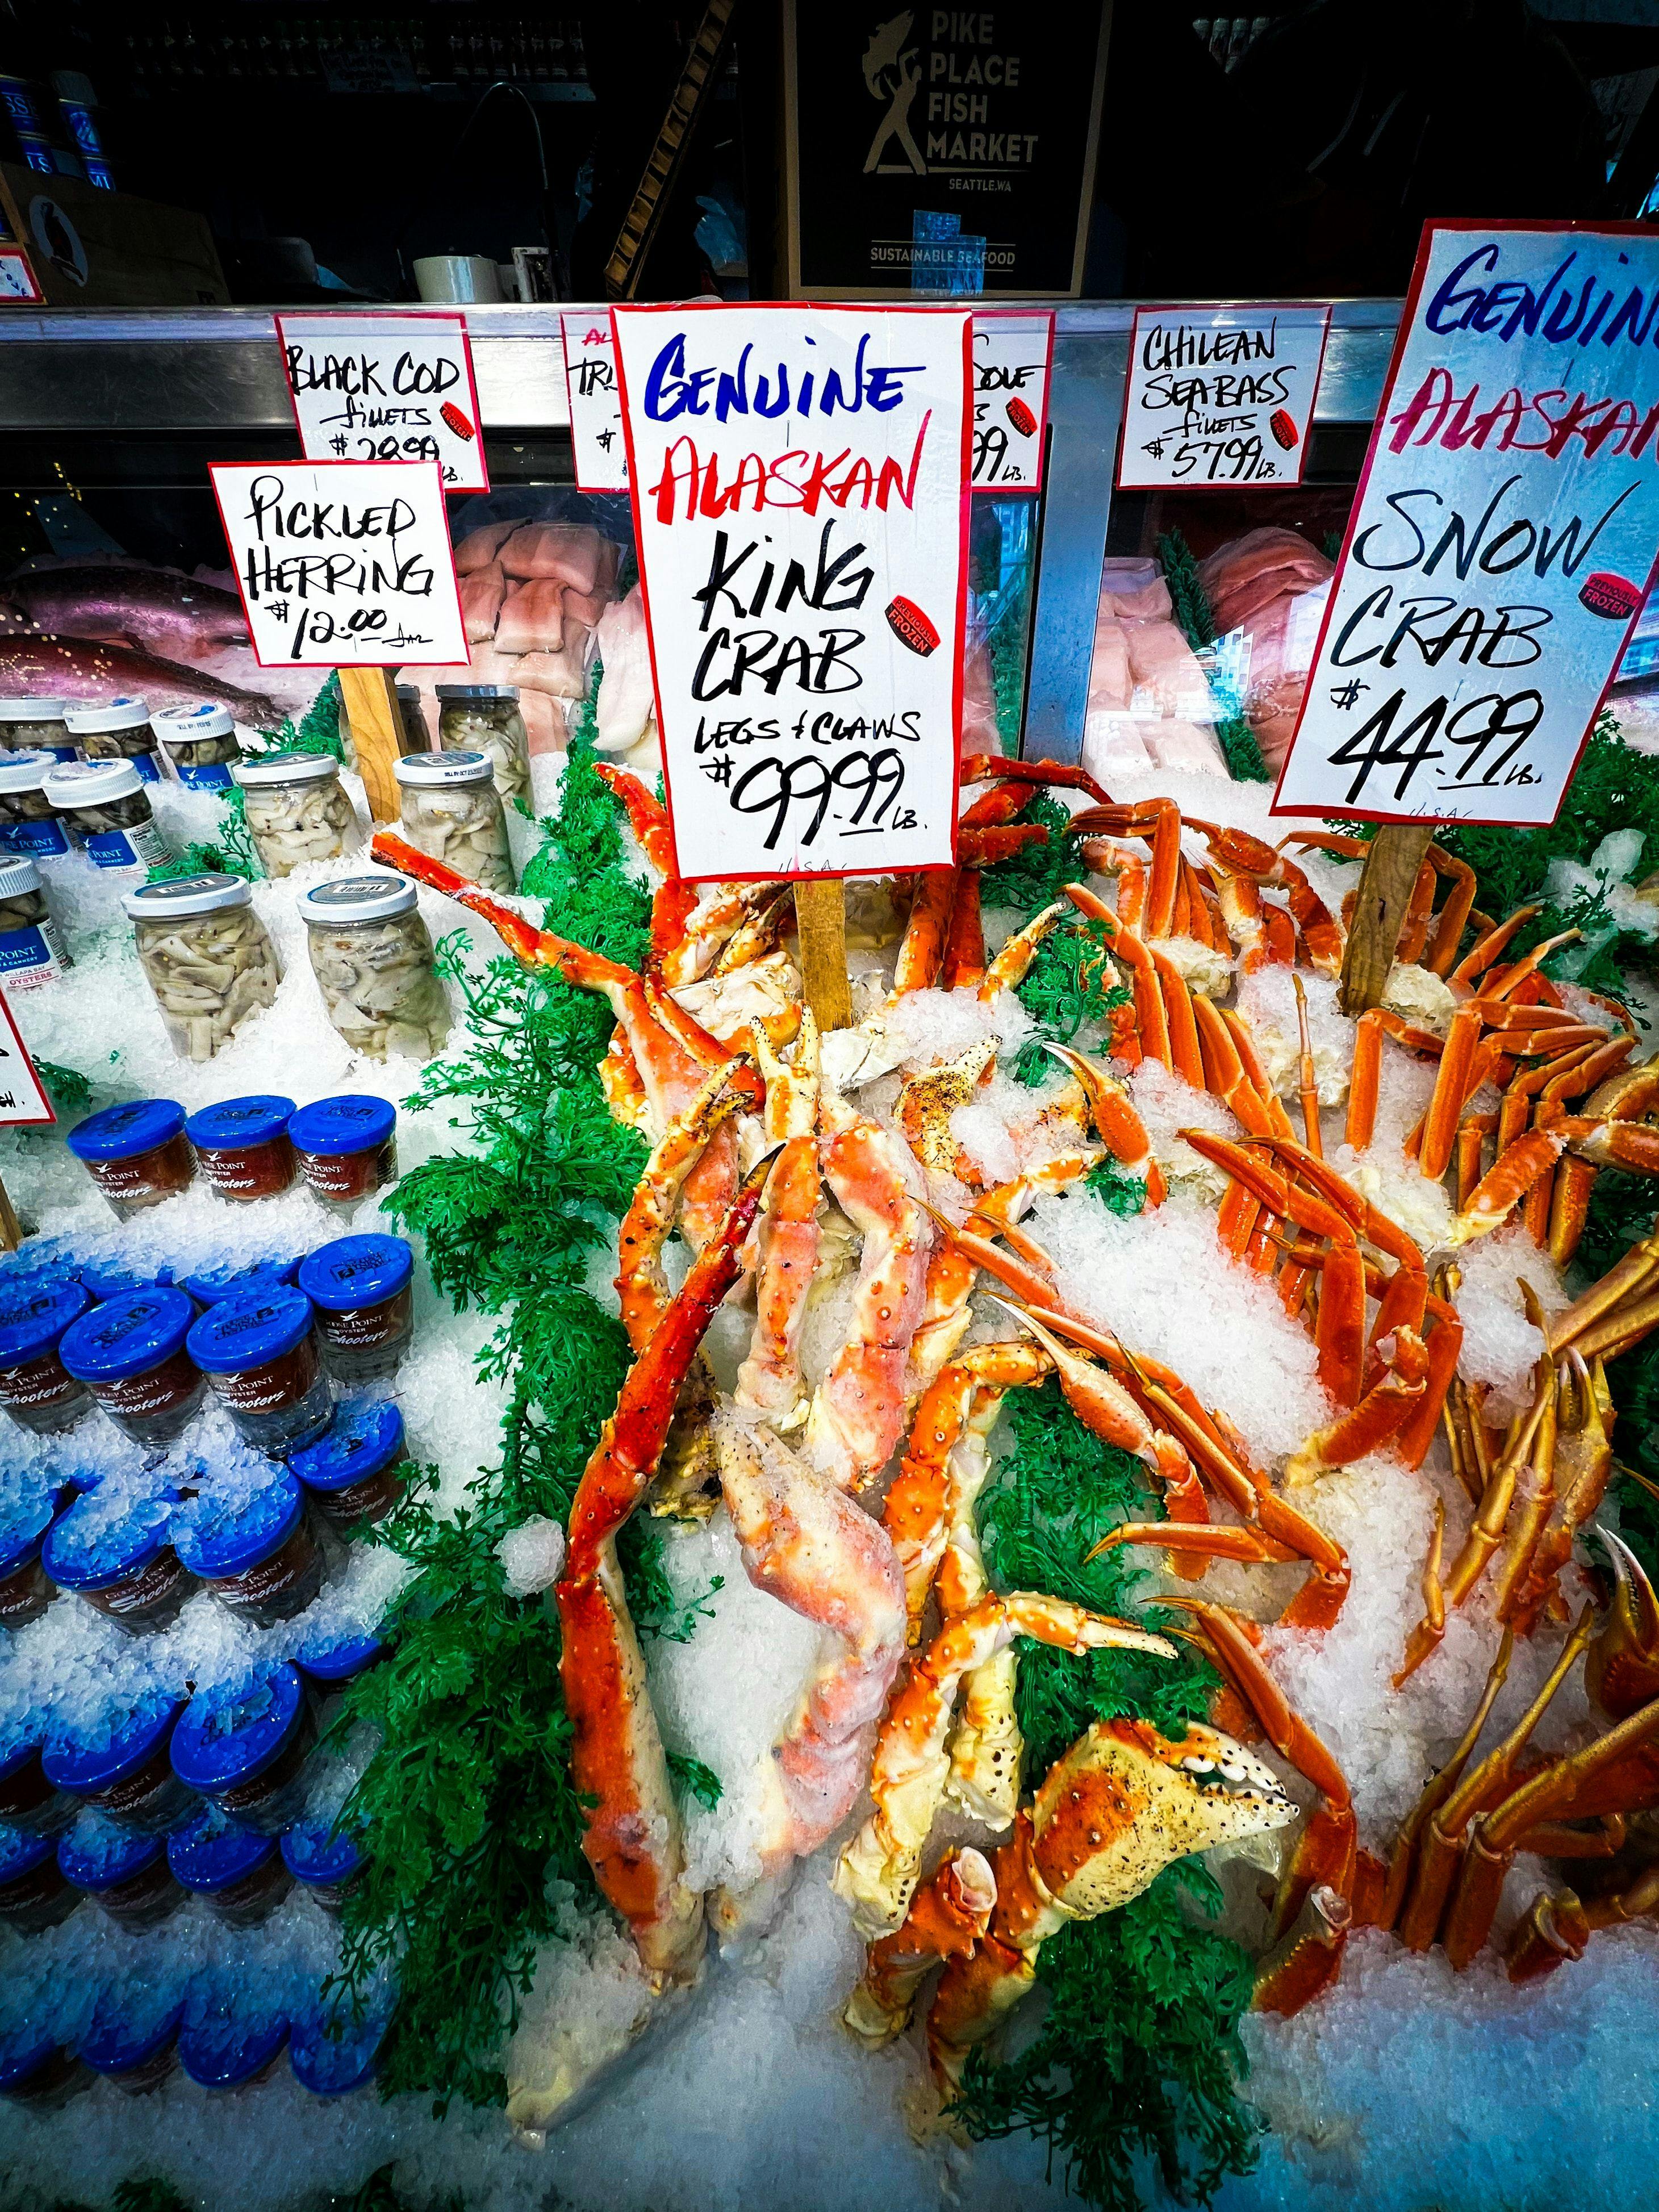 Seafood for sale in local market in Seattle.